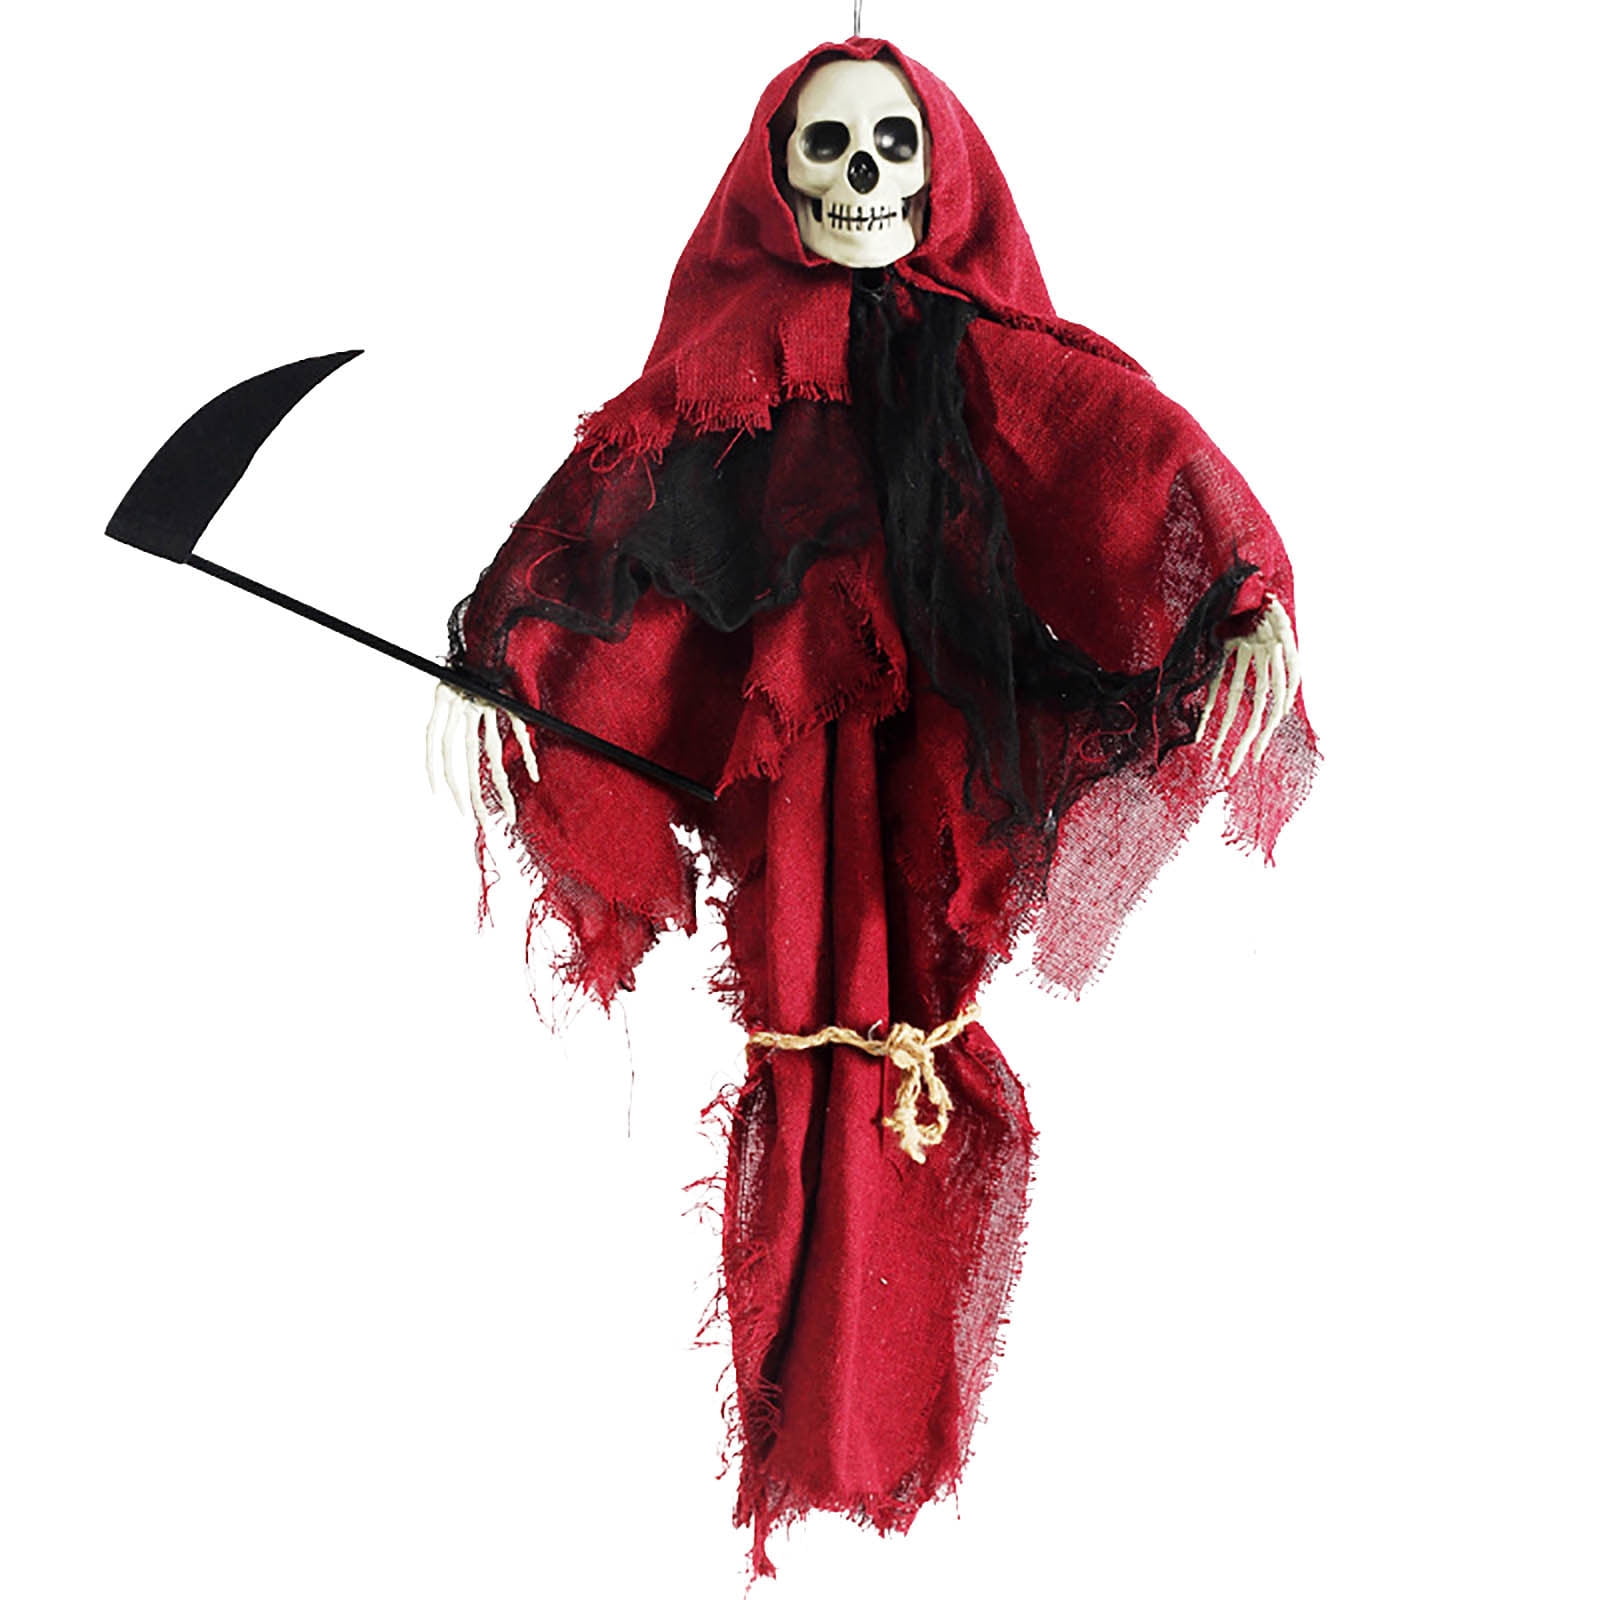 Haunted House Horror Props CREEPY DECAL CLINGS Halloween Decorations-GRIM REAPER 